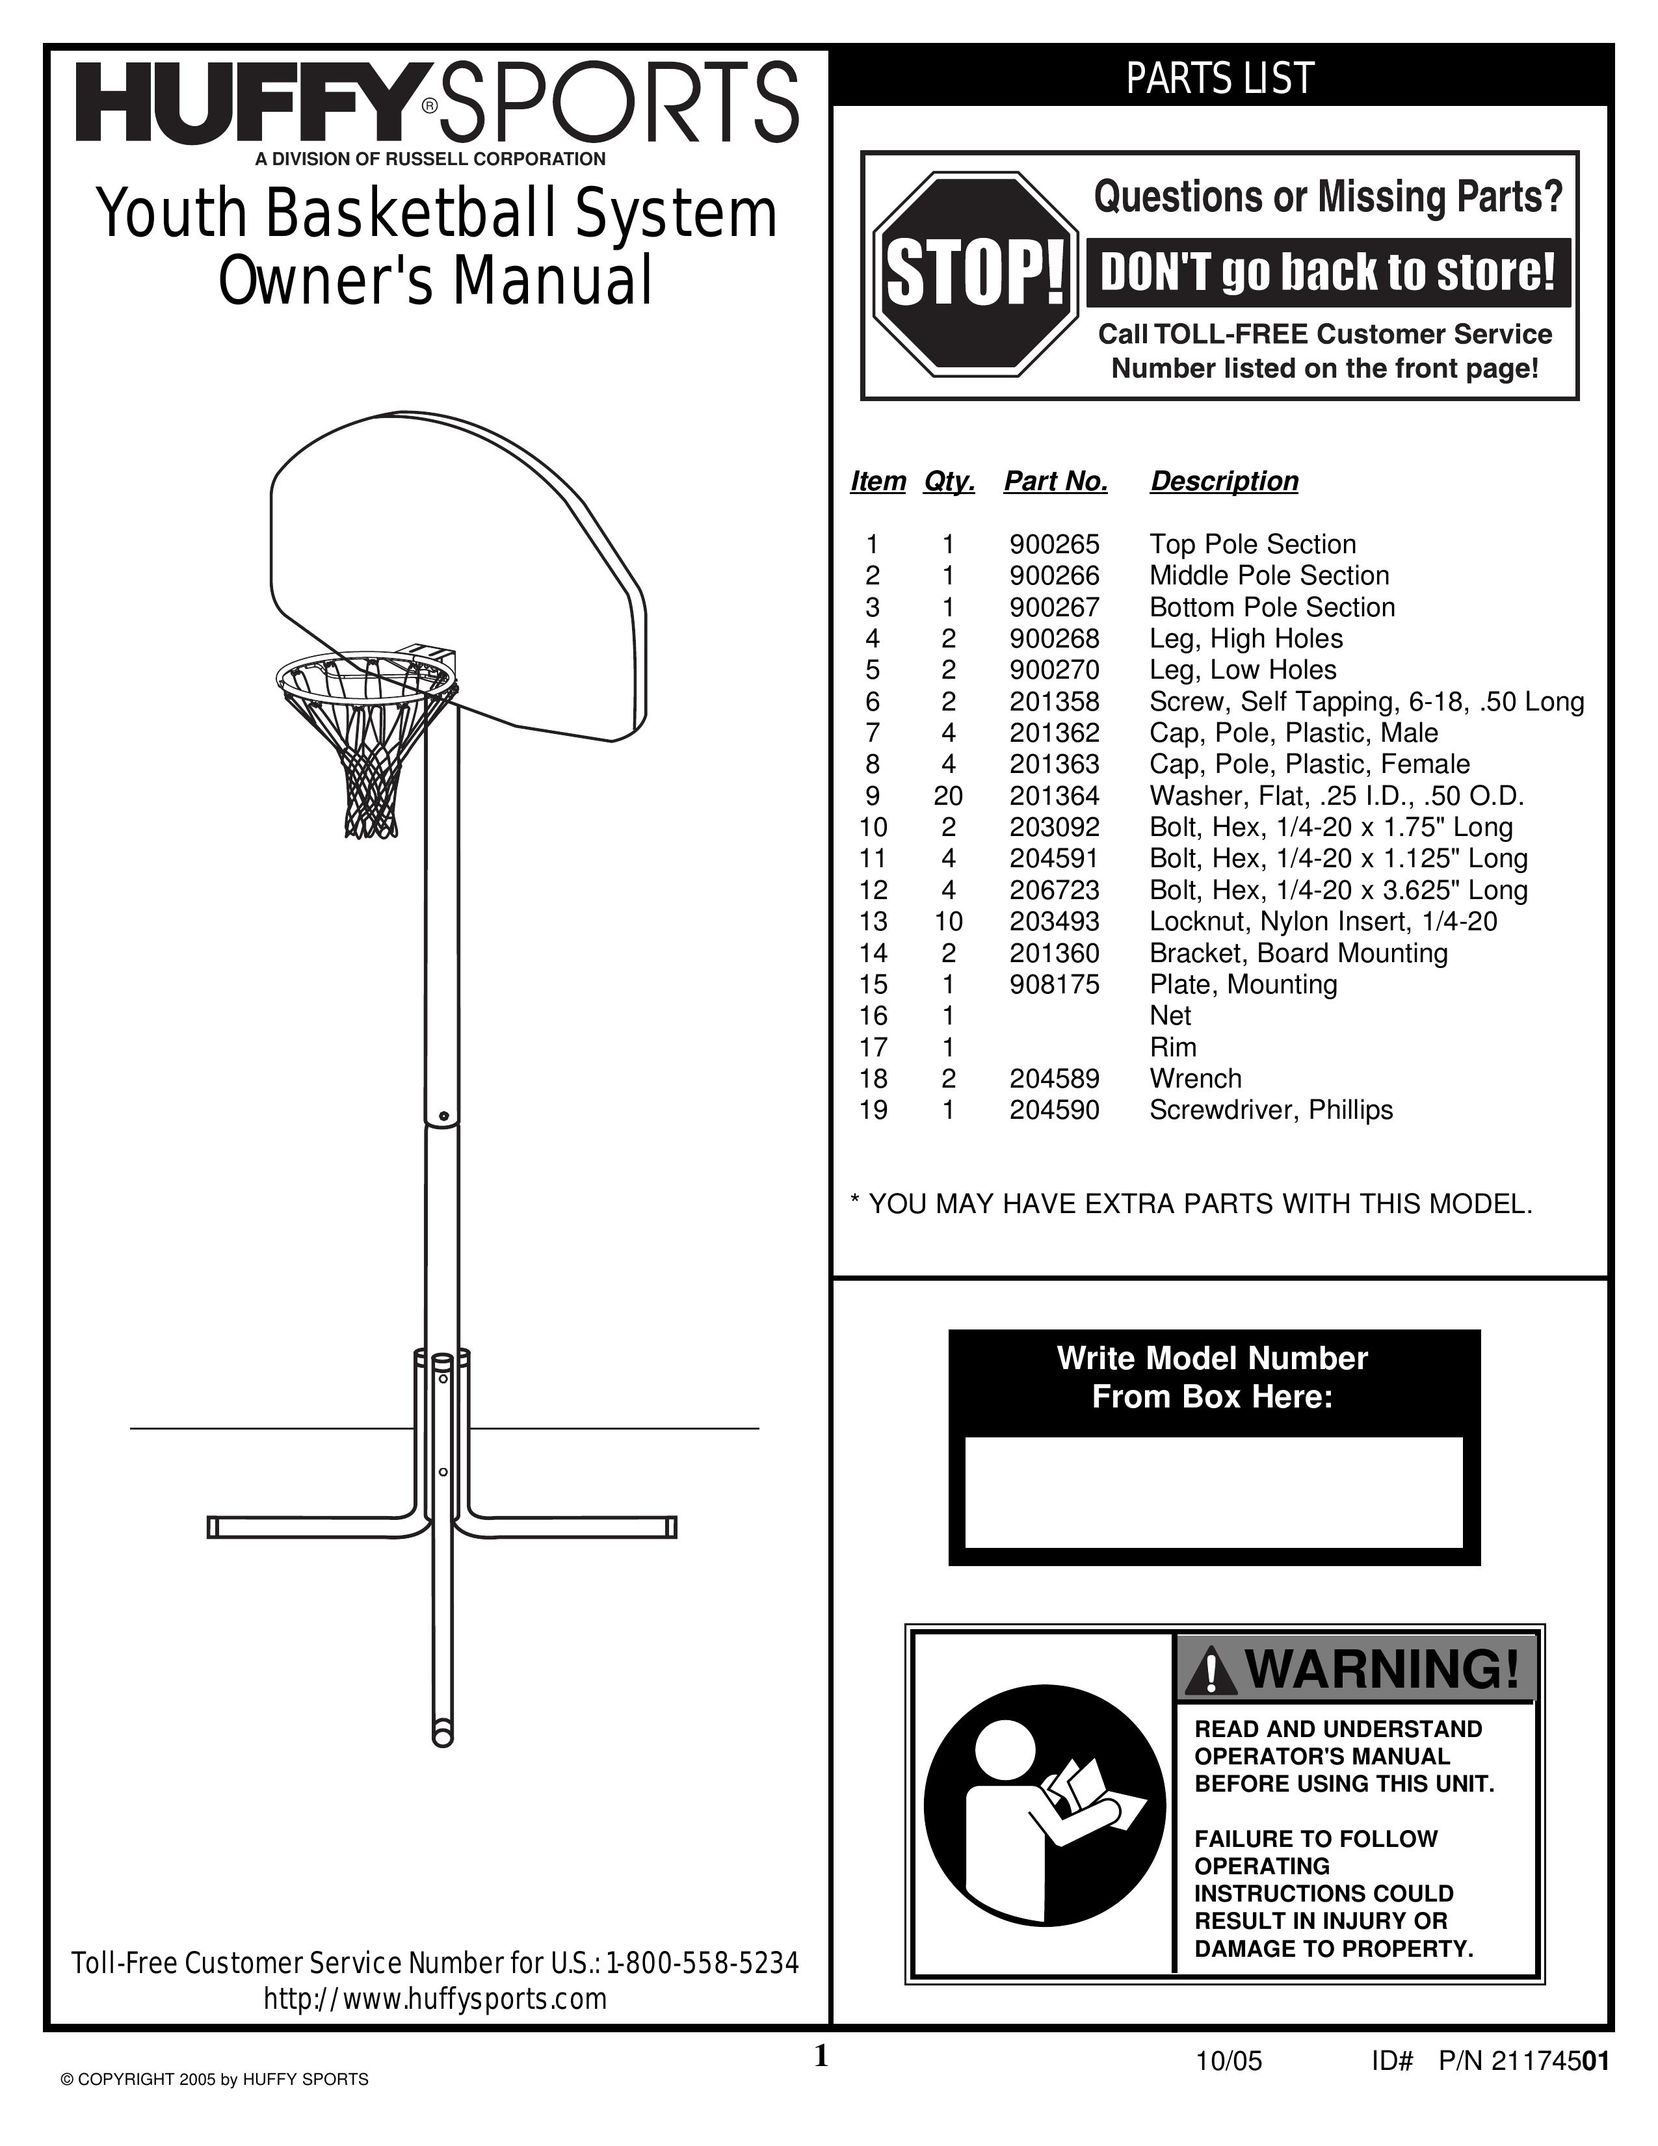 Huffy Youth Basketball System Board Games User Manual